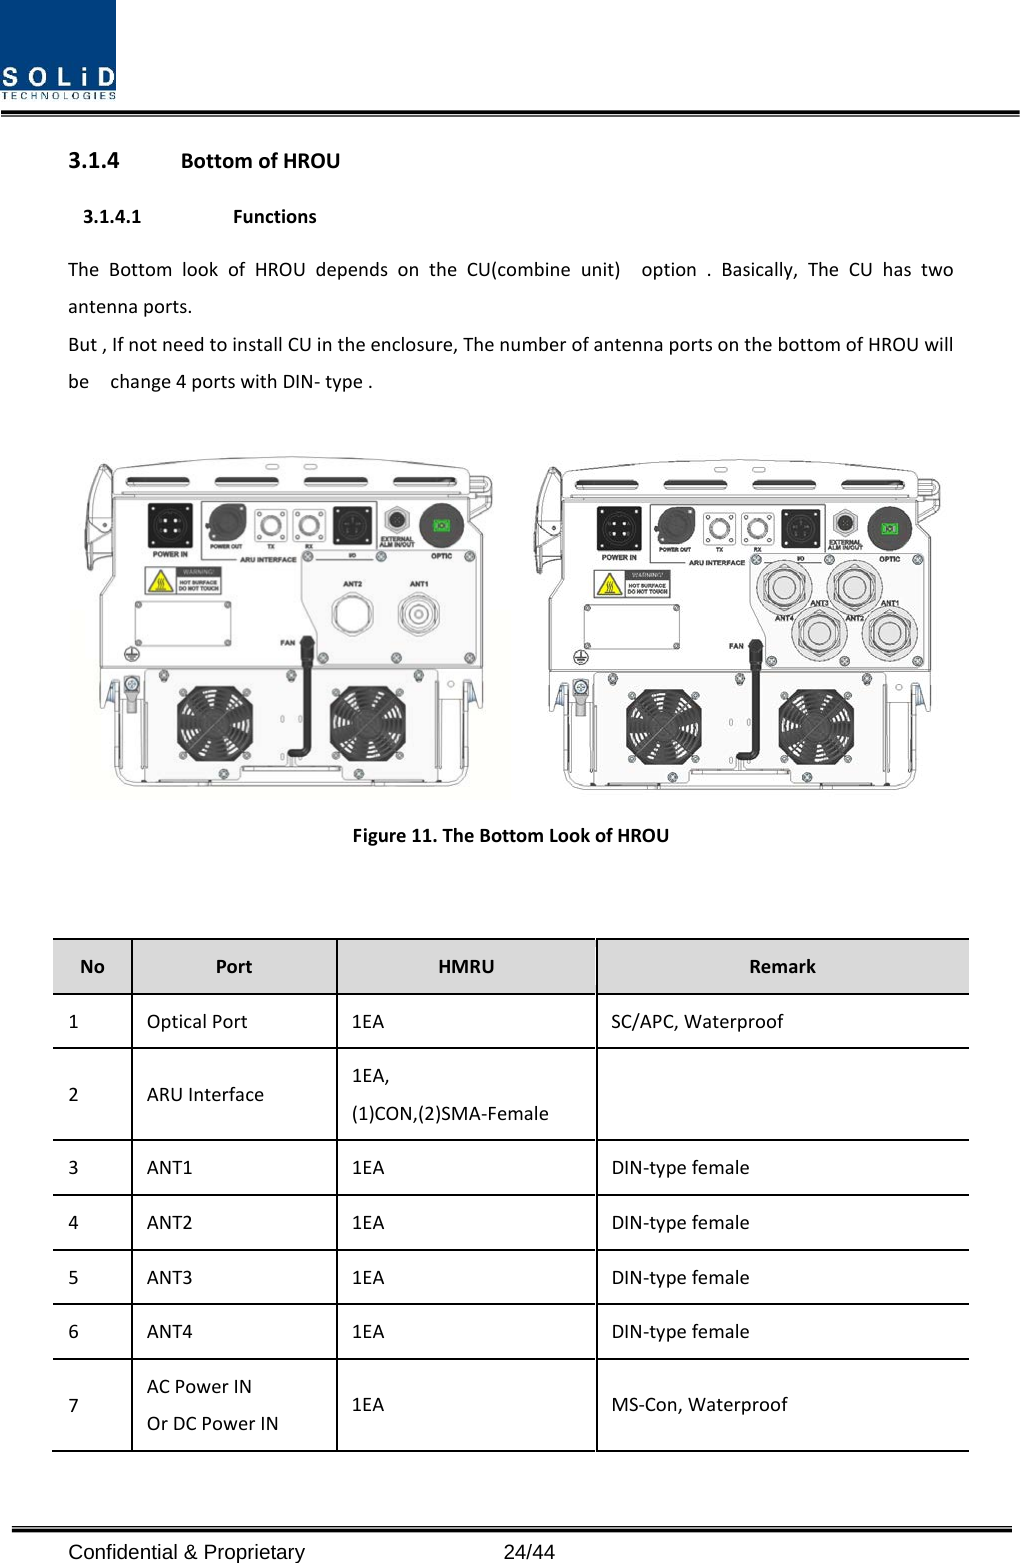  3.1.4 Bottom of HROU 3.1.4.1 Functions The  Bottom look of HROU depends on the CU(combine unit)  option . Basically, The CU has two antenna ports.   But , If not need to install CU in the enclosure, The number of antenna ports on the bottom of HROU will be   change 4 ports with DIN- type .   Figure 11. The Bottom Look of HROU     No Port HMRU Remark 1  Optical Port 1EA SC/APC, Waterproof 2   ARU Interface   1EA, (1)CON,(2)SMA-Female   3  ANT1 1EA DIN-type female 4  ANT2 1EA DIN-type female 5  ANT3  1EA DIN-type female 6  ANT4  1EA DIN-type female 7  AC Power IN   Or DC Power IN  1EA  MS-Con, Waterproof Confidential &amp; Proprietary                   24/44 